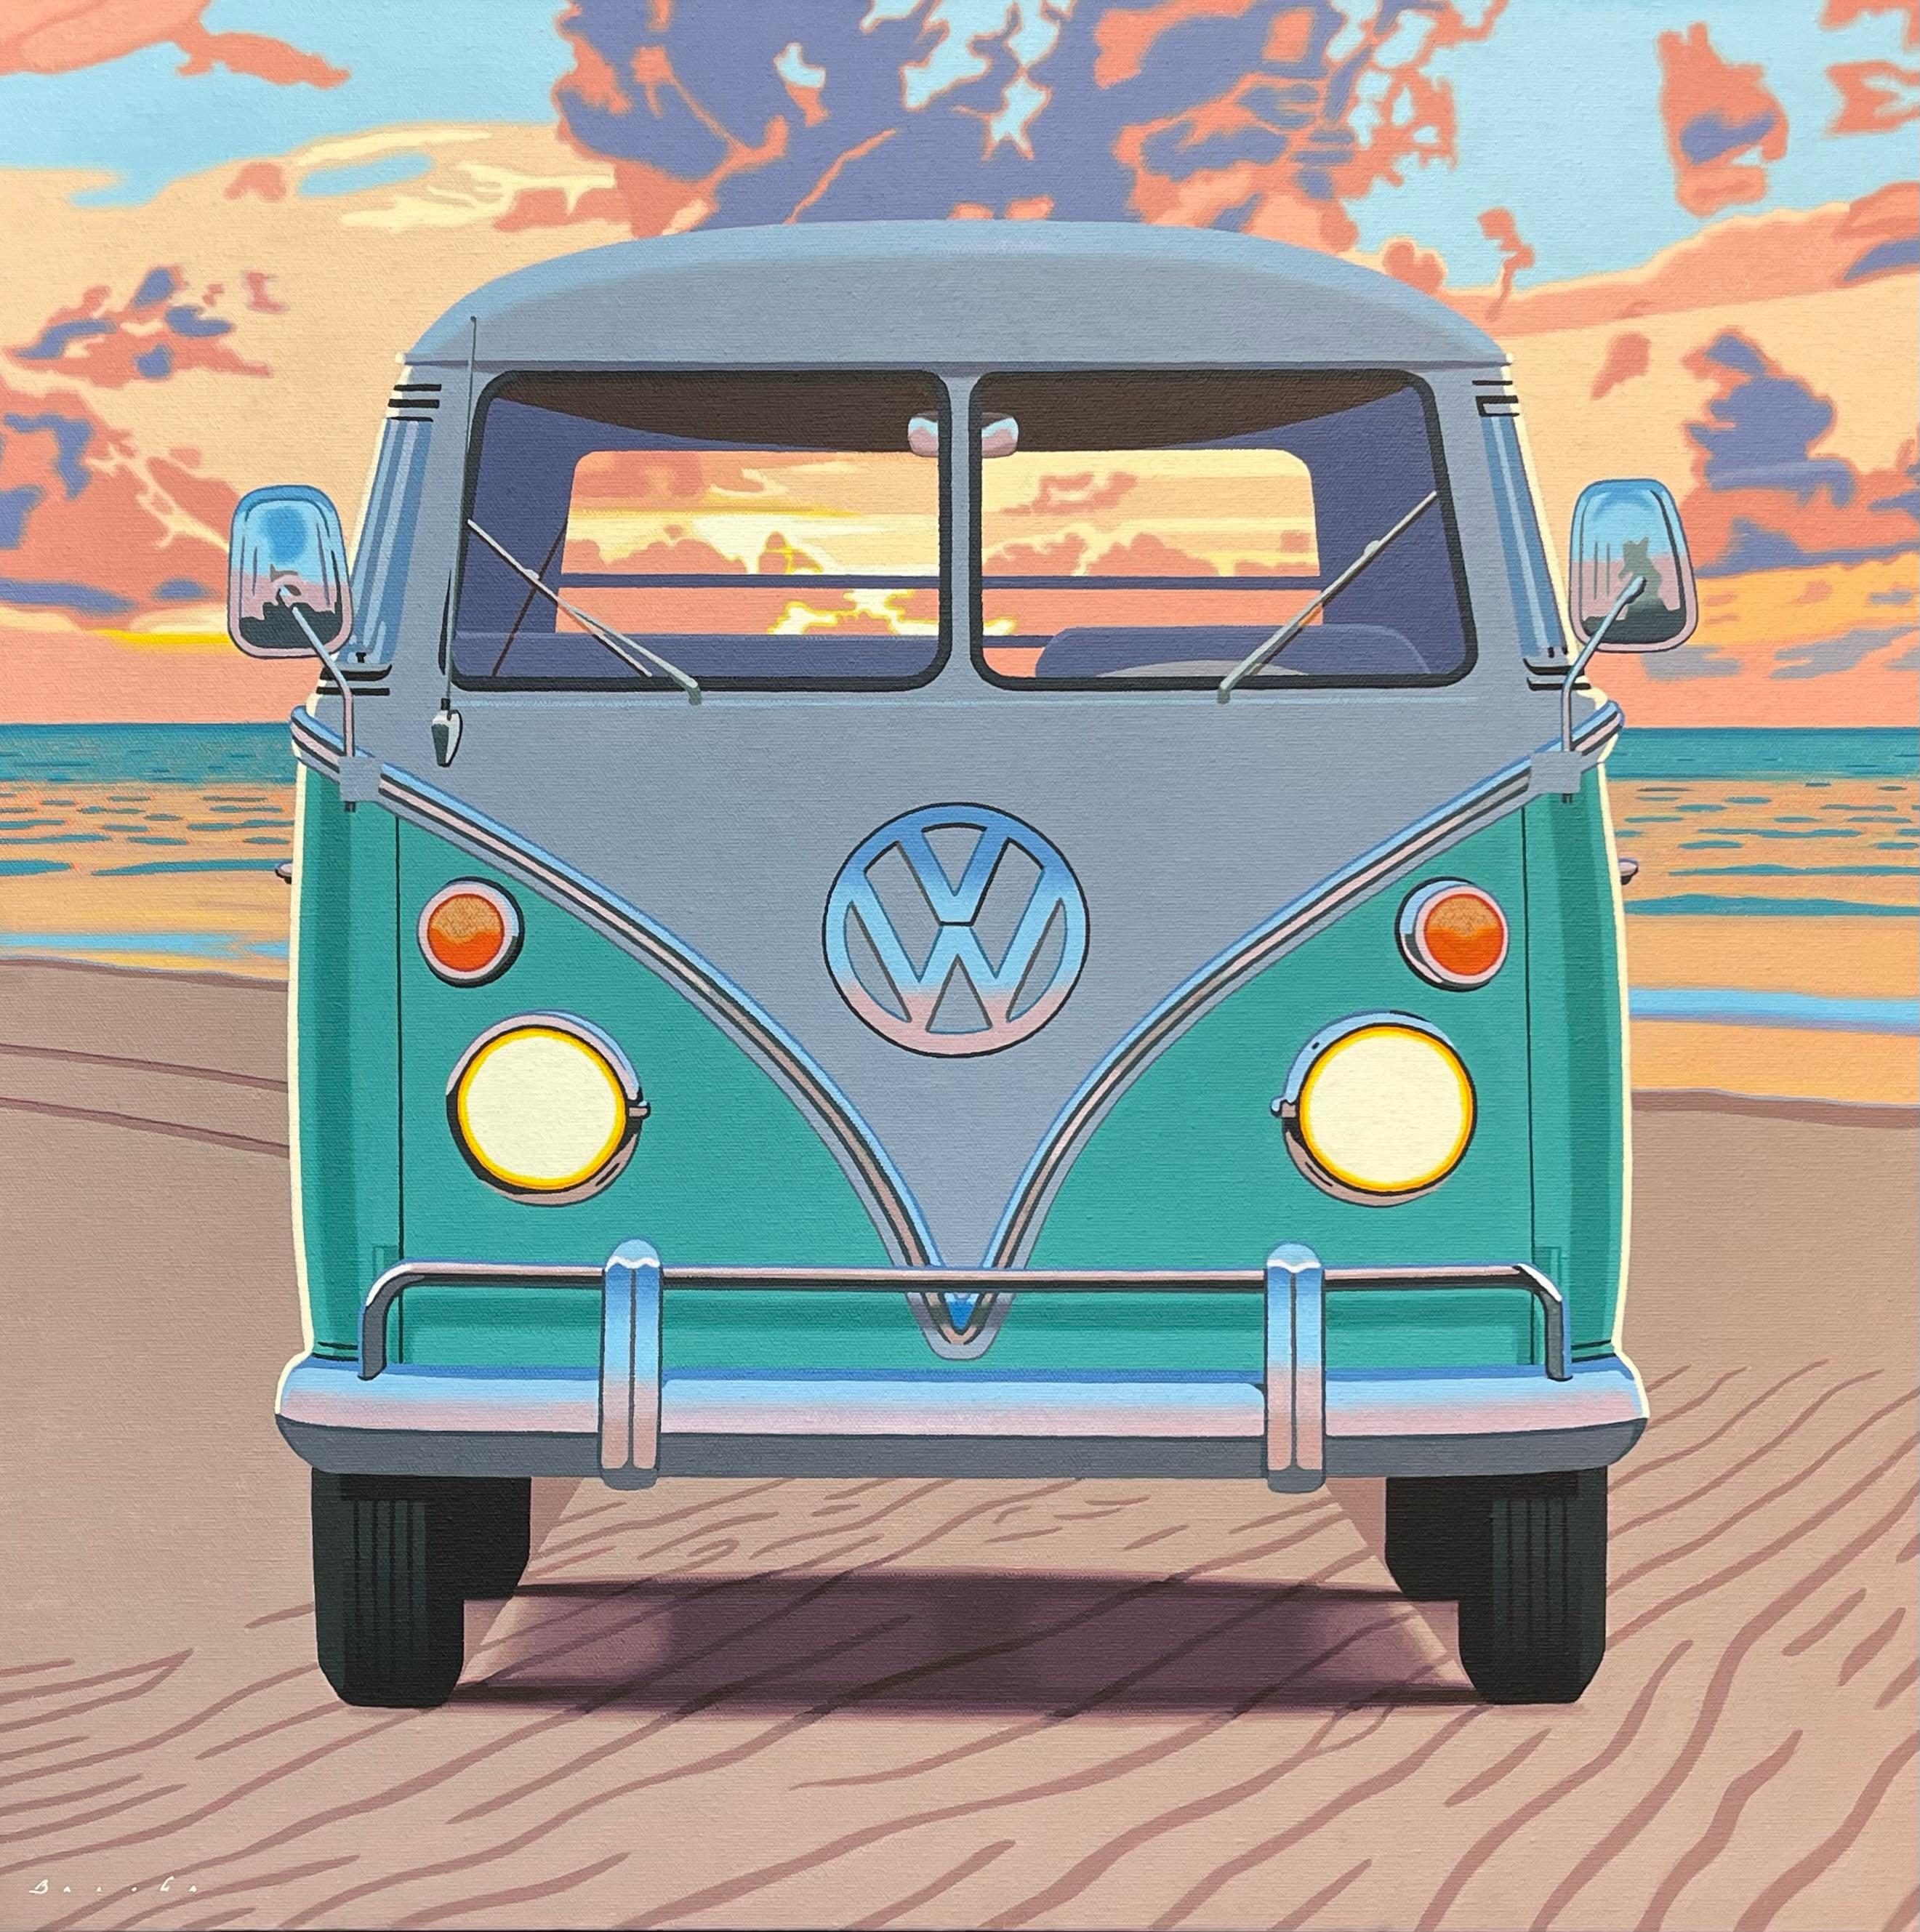 Rob Brooks Still-Life Painting - "Samba Sherbet" oil painting of a green VW bus on the beach at sunset